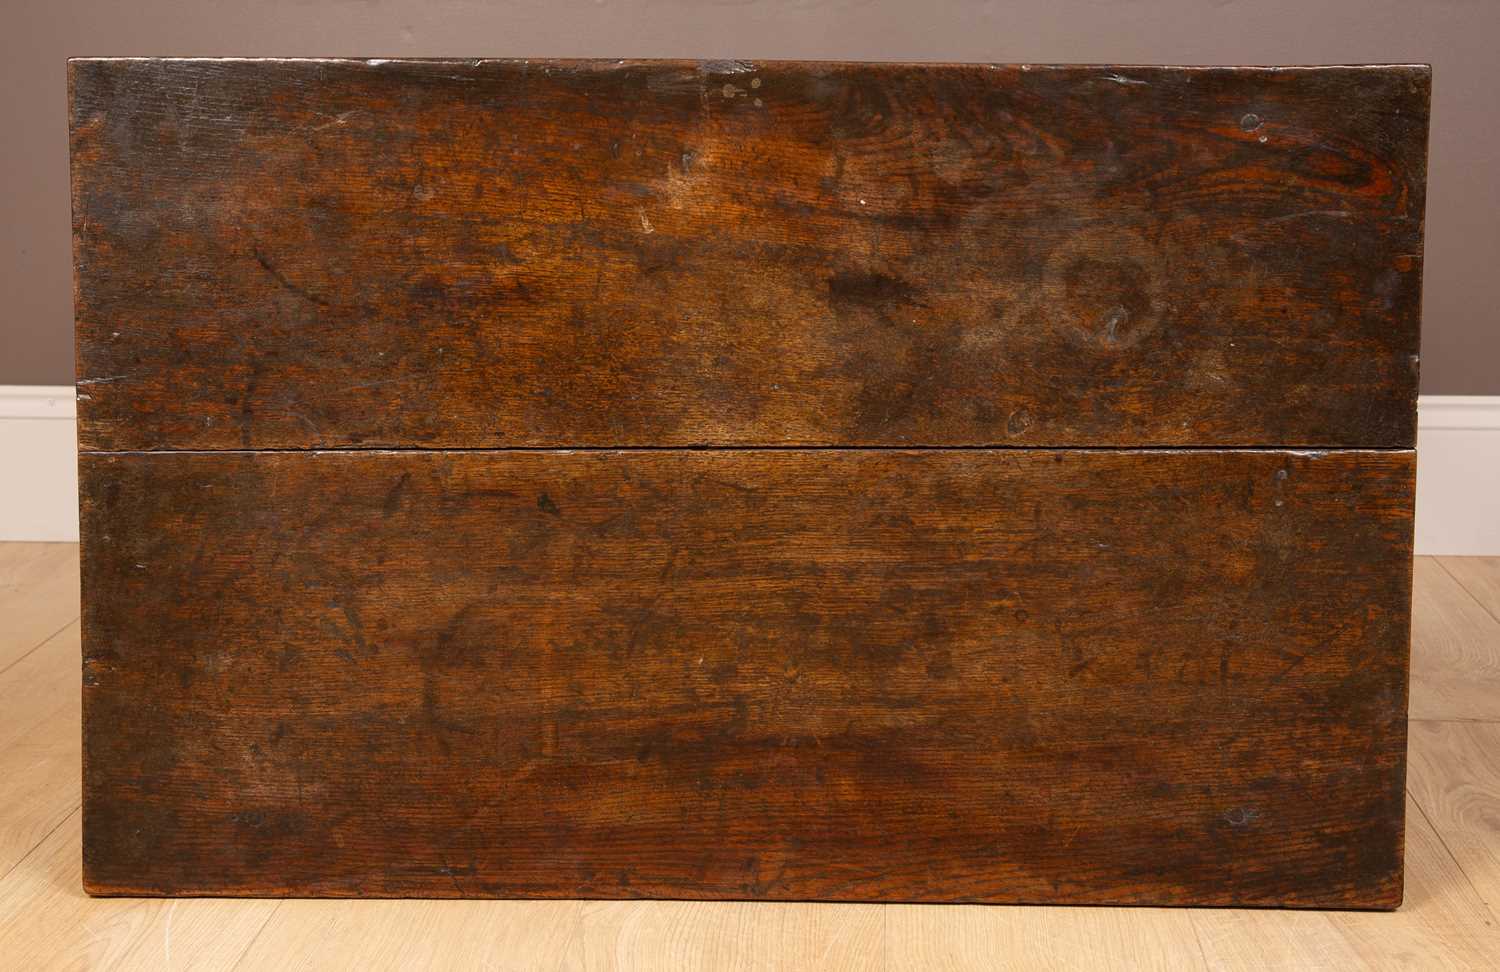 A 17th or 18th century oak centre table - Image 3 of 3